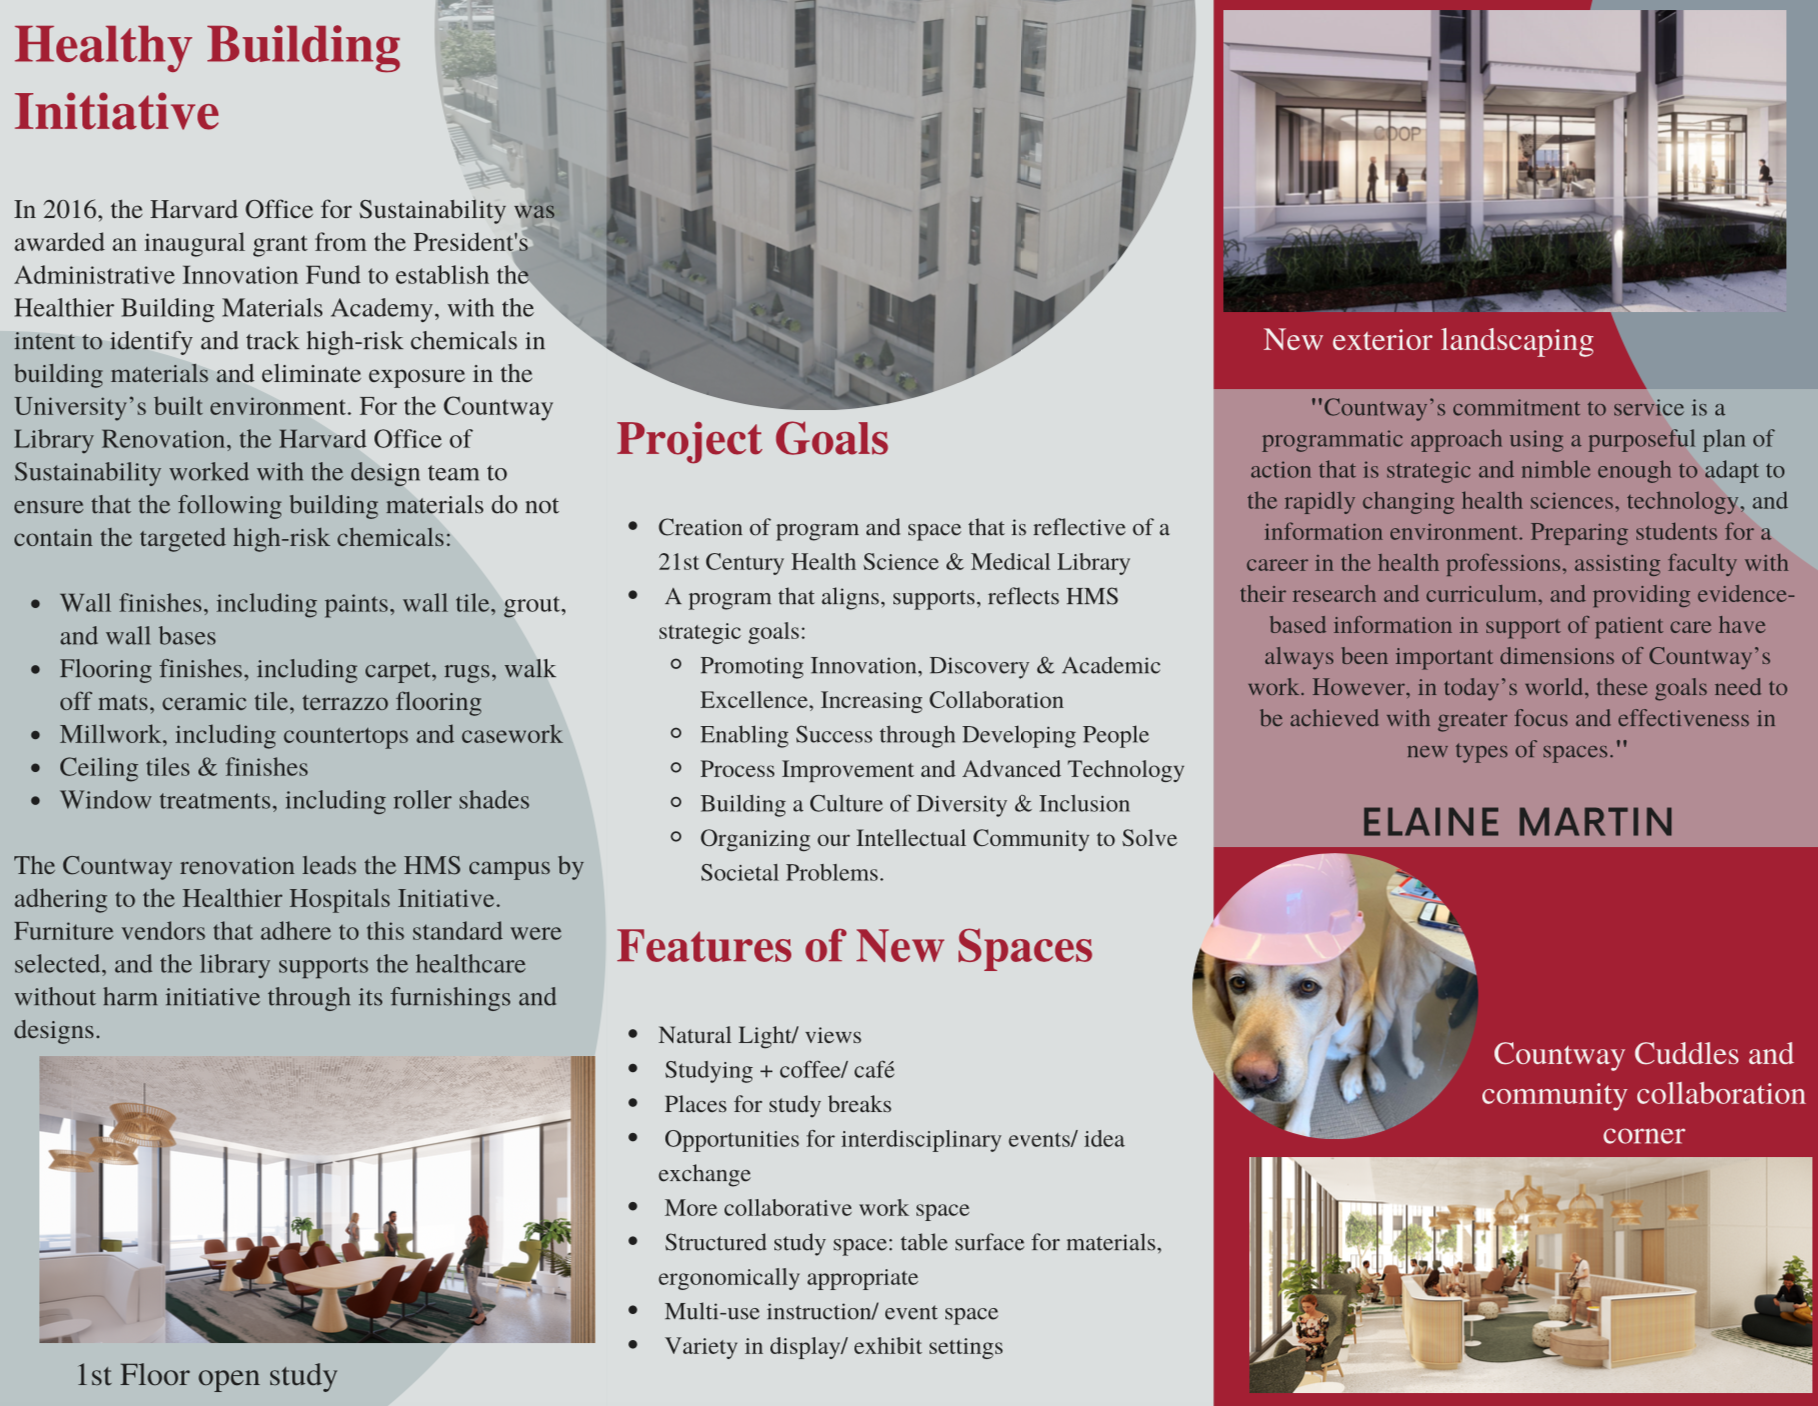 Countway Library renovation brochure page 2 with 3 vertical panels. Panel 4's heading is Healthy Building Initiative. The text reads: In 2016, the Harvard Office for Sustainability was awarded an inaugural grant from the President's Administrative Innovation Fund to establish the Healthier Building Materials Academy, with the intent to identify and track high-risk chemicals in building materials and eliminate exposure in the University’s built environment. For the Countway Library Renovation, the Harvard Office of Sustainability worked with the design team to ensure that the following building materials do not contain the targeted high-risk chemicals: Wall finishes, including paints, wall tile, grout, and wall bases; Flooring finishes, including carpet, rugs, walk off mats, ceramic tile, terrazzo flooring; Millwork, including countertops and casework; Ceiling tiles & finishes; and Window treatments, including roller shades. The Countway renovation leads the HMS campus by adhering to the Healthier Hospitals Initiative. Furniture vendors that adhere to this standard were selected, and the library supports the healthcare without harm initiative through its furnishings and designs. The heading for Panel 5 is Project Goals. The text reads: Creation of program and space that is reflective of a 21st Century Health Science & Medical Library; A program that aligns, supports, reflects HMS strategic goals: Promoting Innovation, Discovery & Academic Excellence, Increasing Collaboration; Enabling Success through Developing People; Process Improvement and Advanced Technology; Building a Culture of Diversity & Inclusion; and Organizing our Intellectual Community to Solve Societal Problems. Features of New Spaces: Natural Light/ views; Studying + coffee/ café; Places for study breaks; Opportunities for interdisciplinary events/ idea exchange; More collaborative work space; Structured study space: table surface for materials, ergonomically appropriate; Multi-use instruction/ event space; Variety in display/ exhibit settings. Panel 6 includes a picture rendering of new exterior landscaping and the following quote: Countway’s commitment to service is a programmatic approach using a purposeful plan of action that is strategic and nimble enough to adapt to the rapidly changing health sciences, technology, and information environment. Preparing students for a career in the health professions, assisting faculty with their research and curriculum, and providing evidence-based information in support of patient care have always been important dimensions of Countway’s work. However, in today’s world, these goals need to be achieved with greater focus and effectiveness in new types of spaces. from Elaine Martin. This is followed by a picture rendering of Countway Cuddles and community collaboration corner.